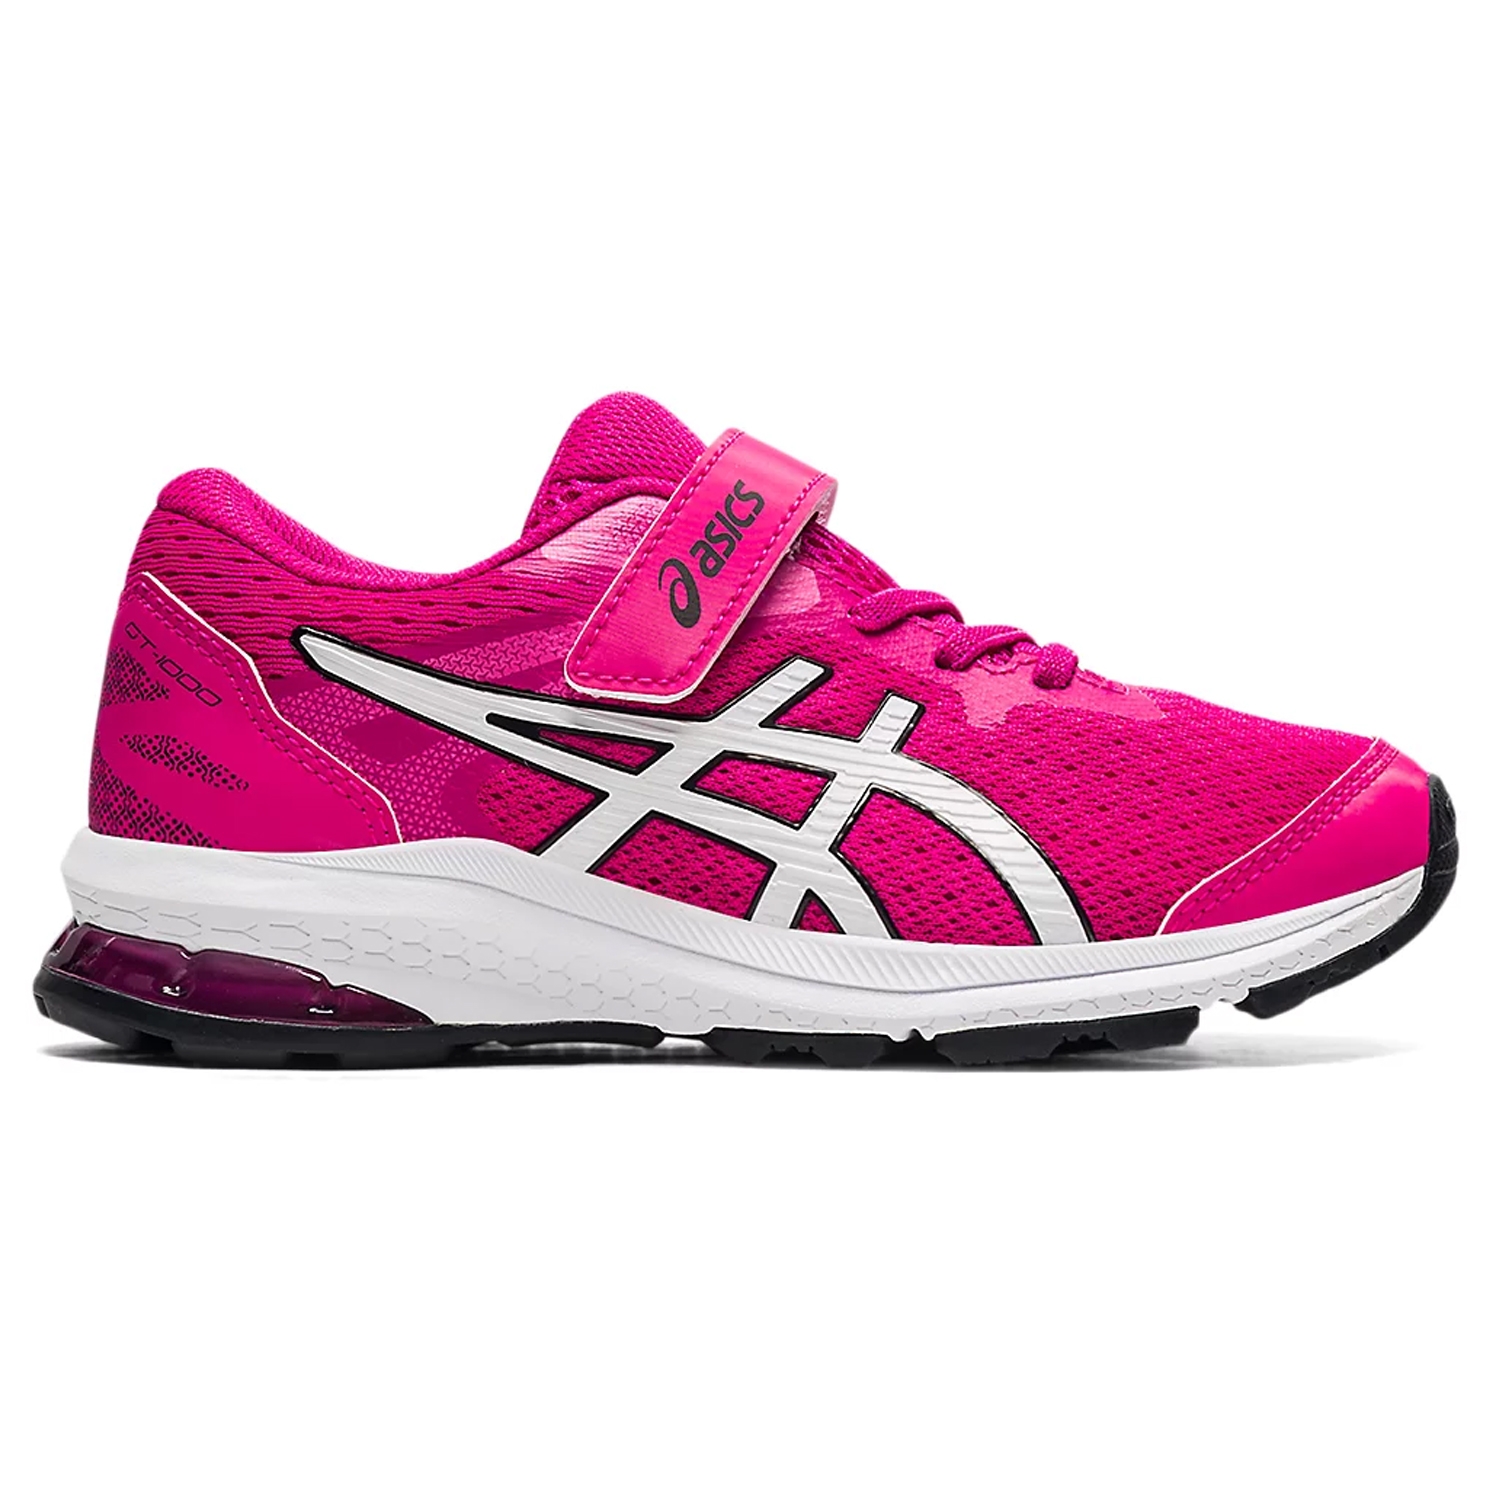 Asics GT-1000 10 PS Girls Running Shoes: Pink Rave/White | Mike Pawley ...